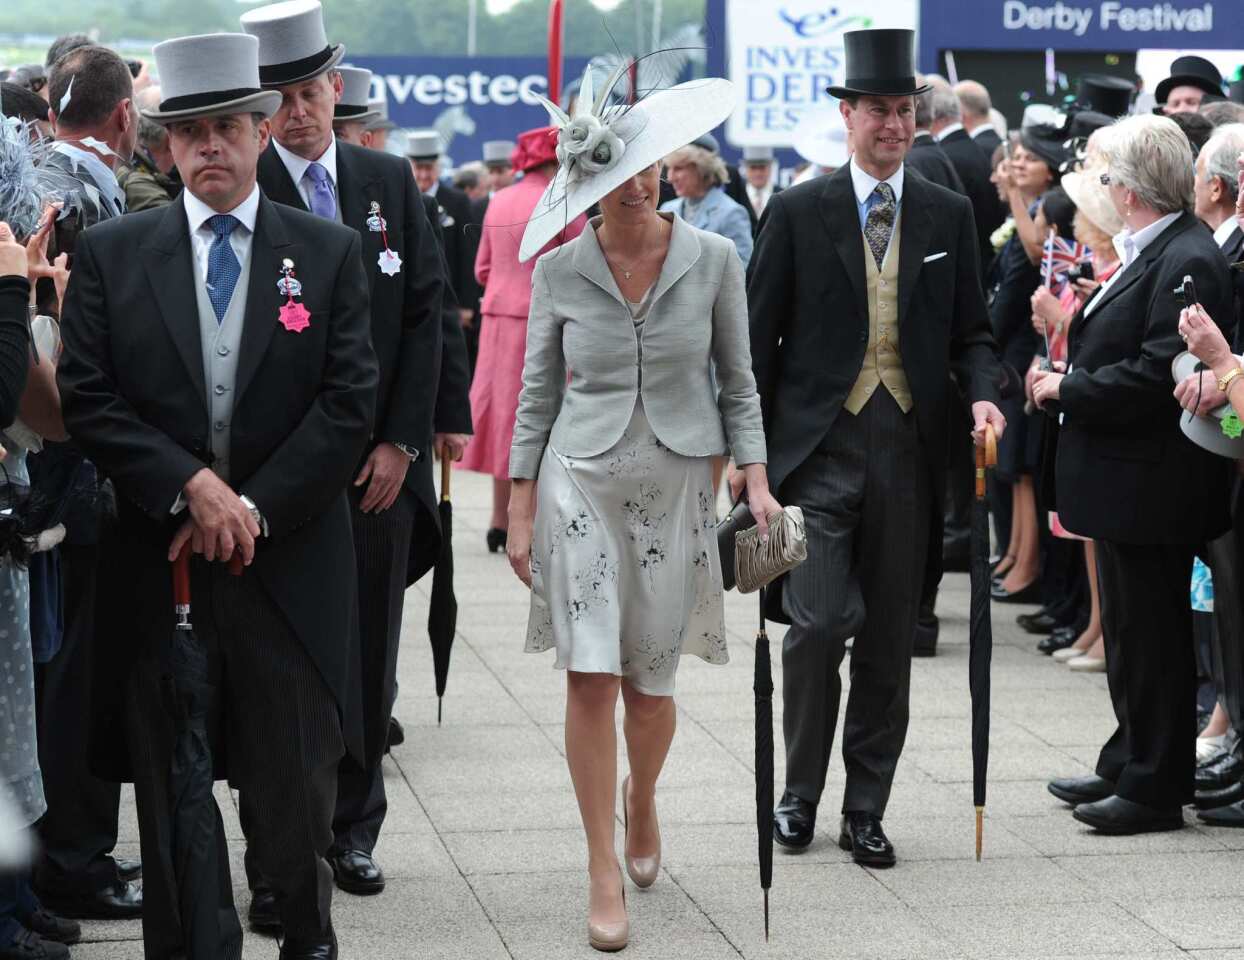 Guests arrive on Derby Day